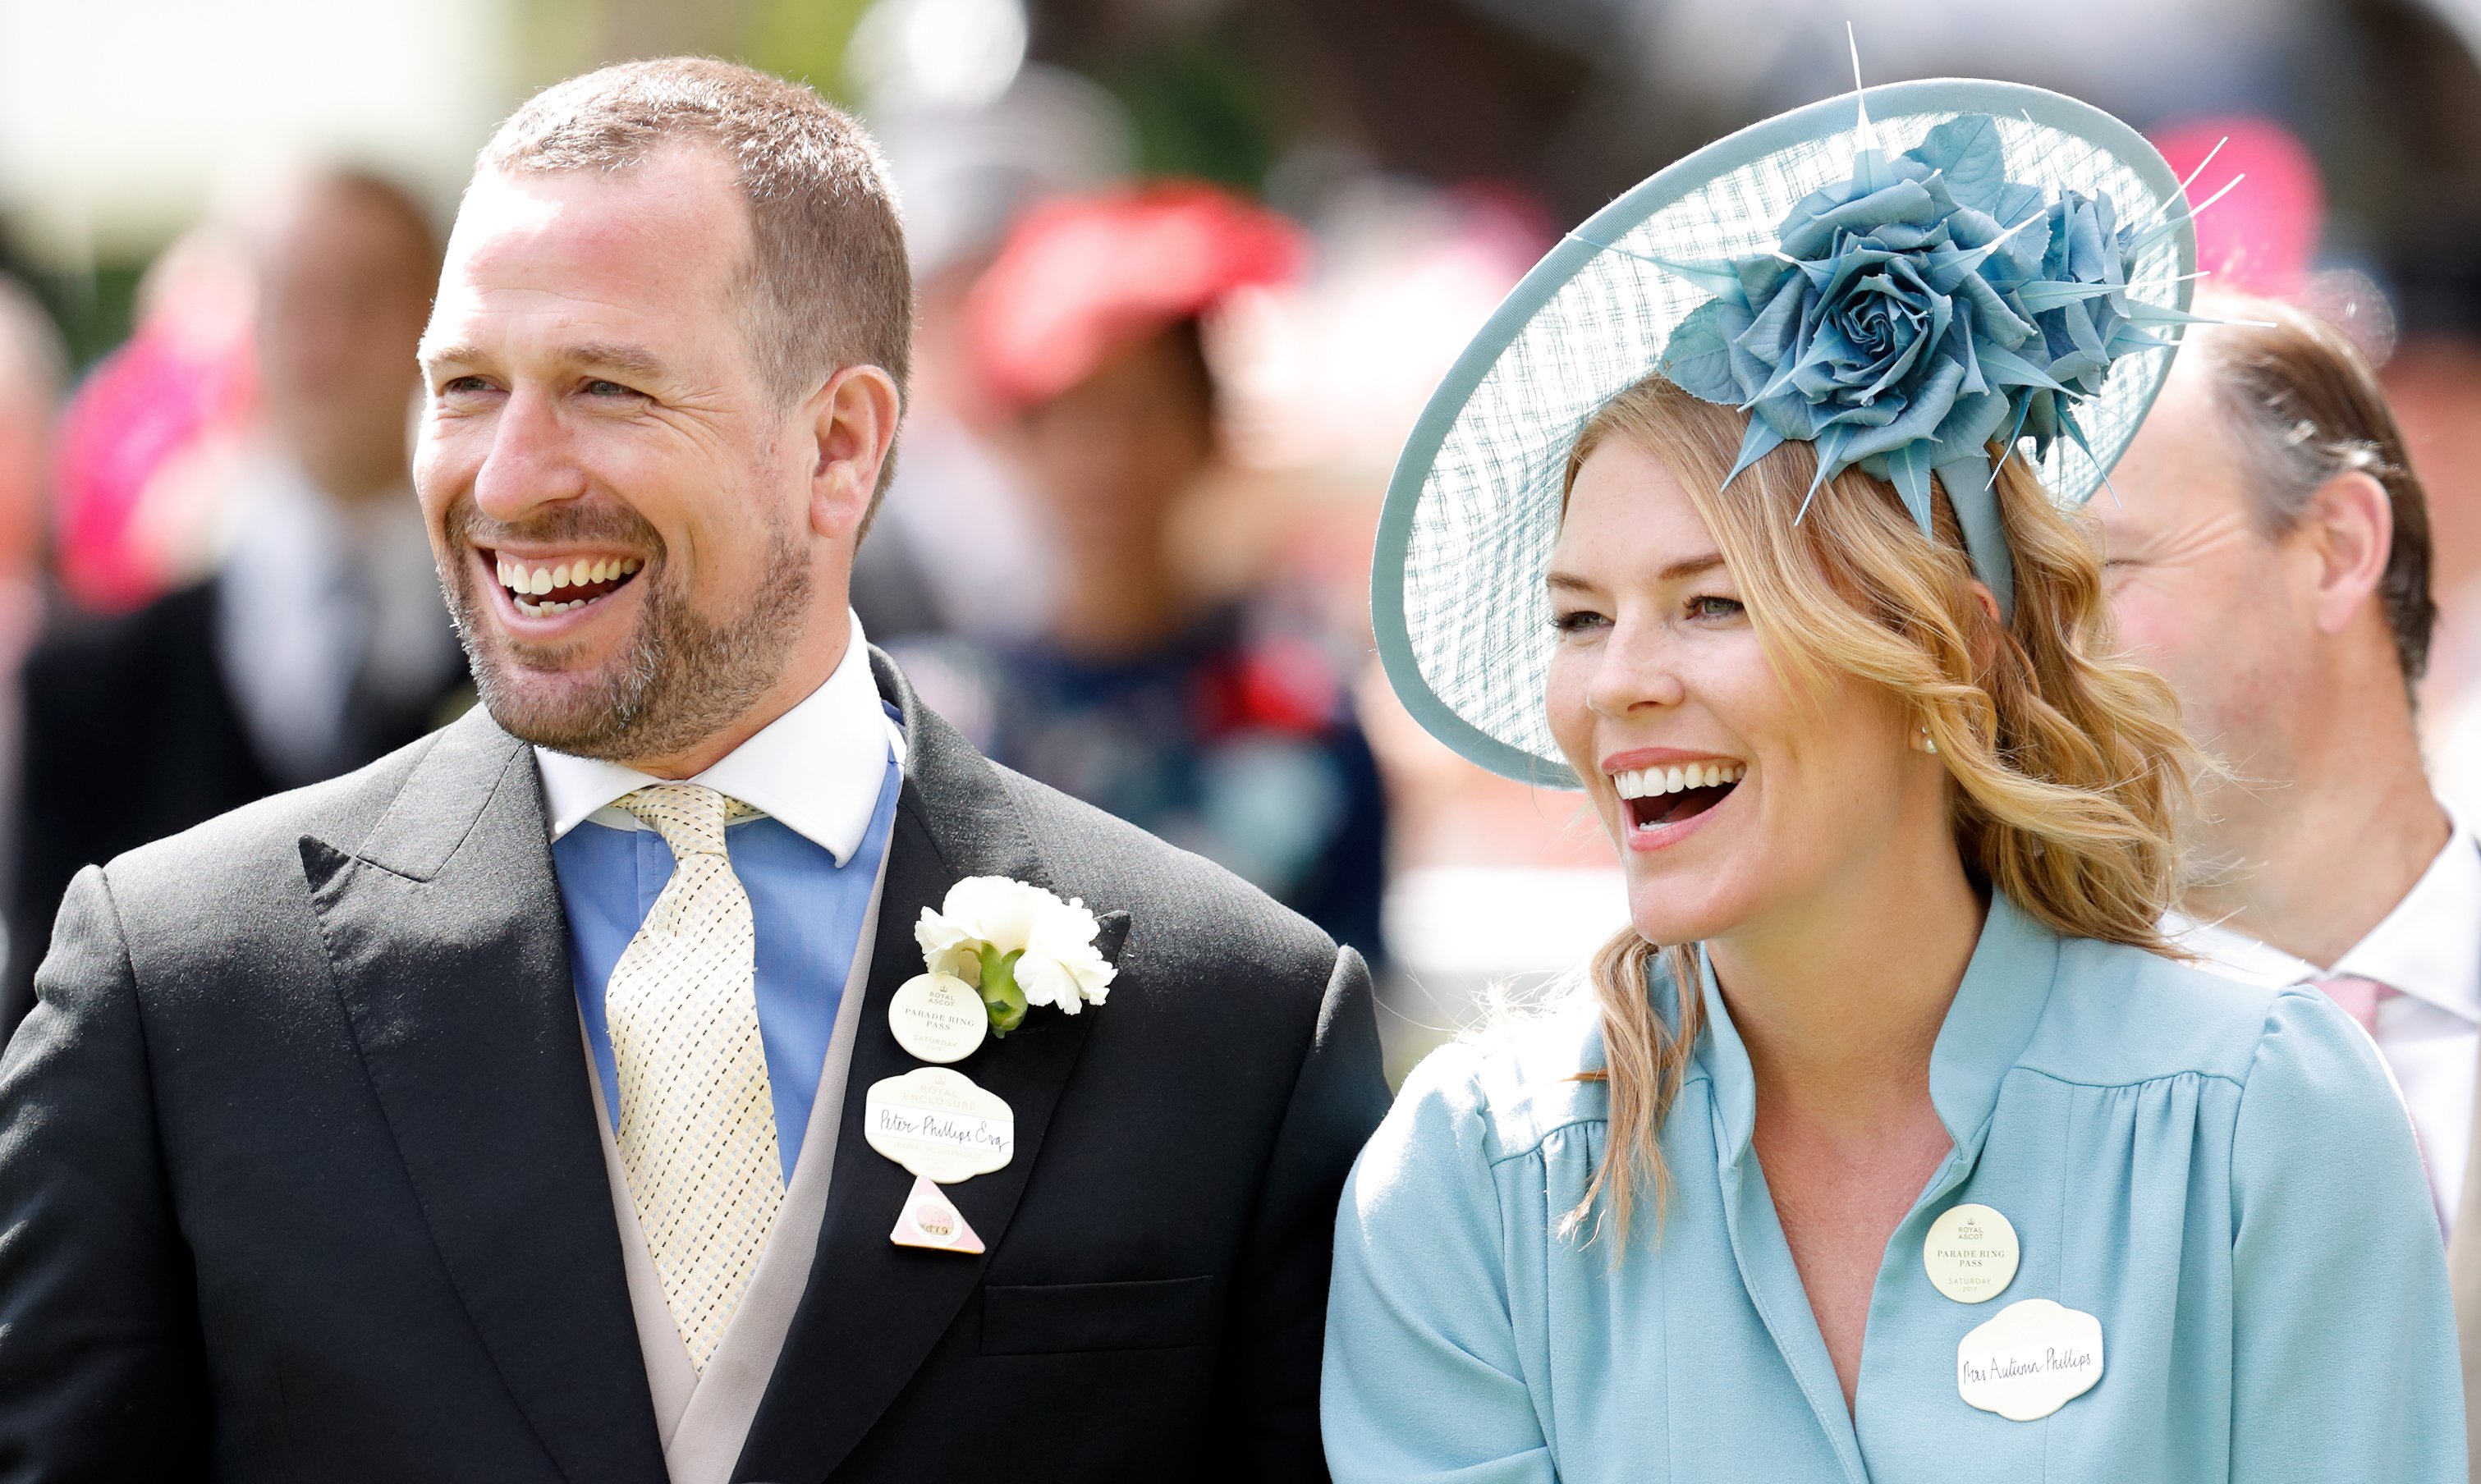 Peter Phillips pictured with his ex-wife, Autumn Phillips, pictured at  day five of Royal Ascot at Ascot Racecourse, 2019, Ascot, England. | Photo: Getty Images